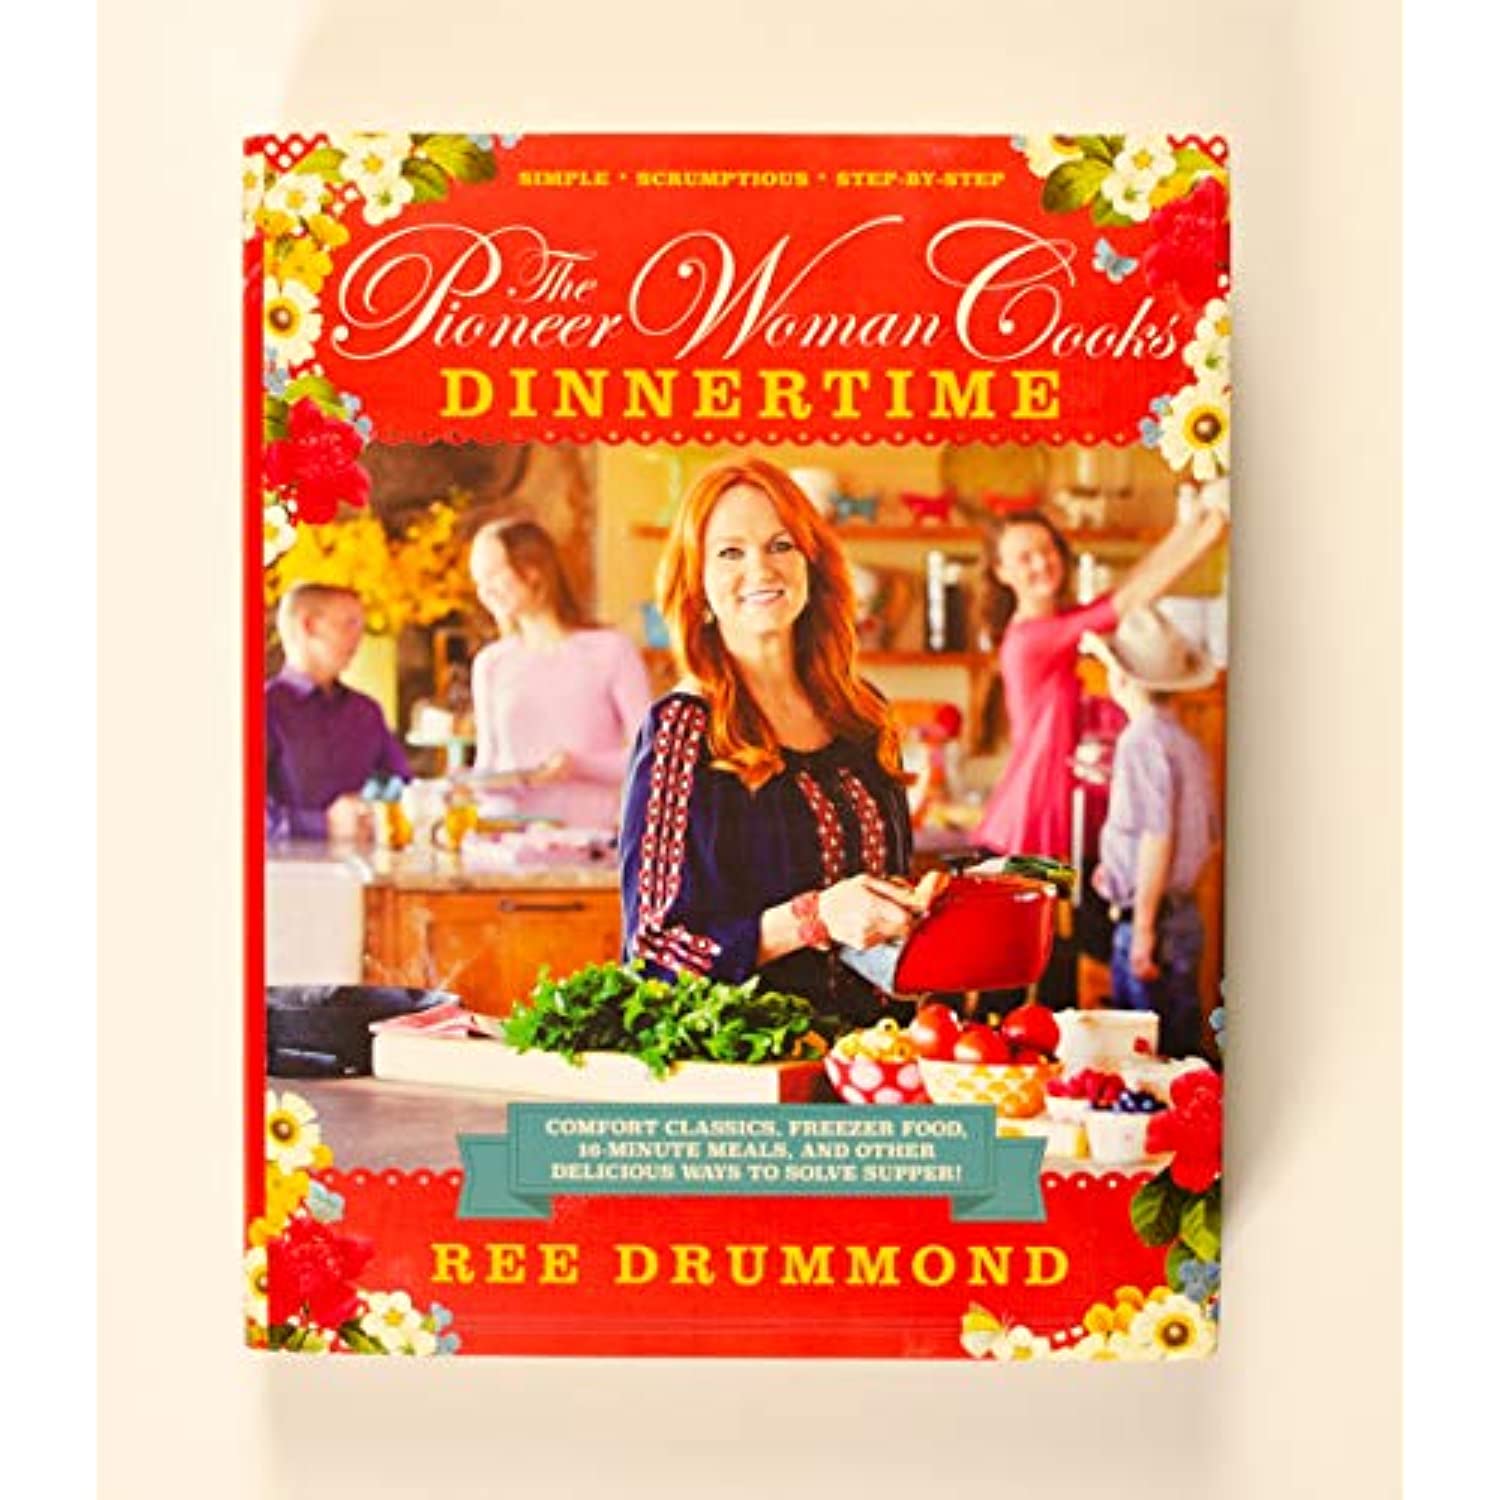 The Pioneer Woman Cooks--Dinnertime (Hardcover) - image 3 of 5